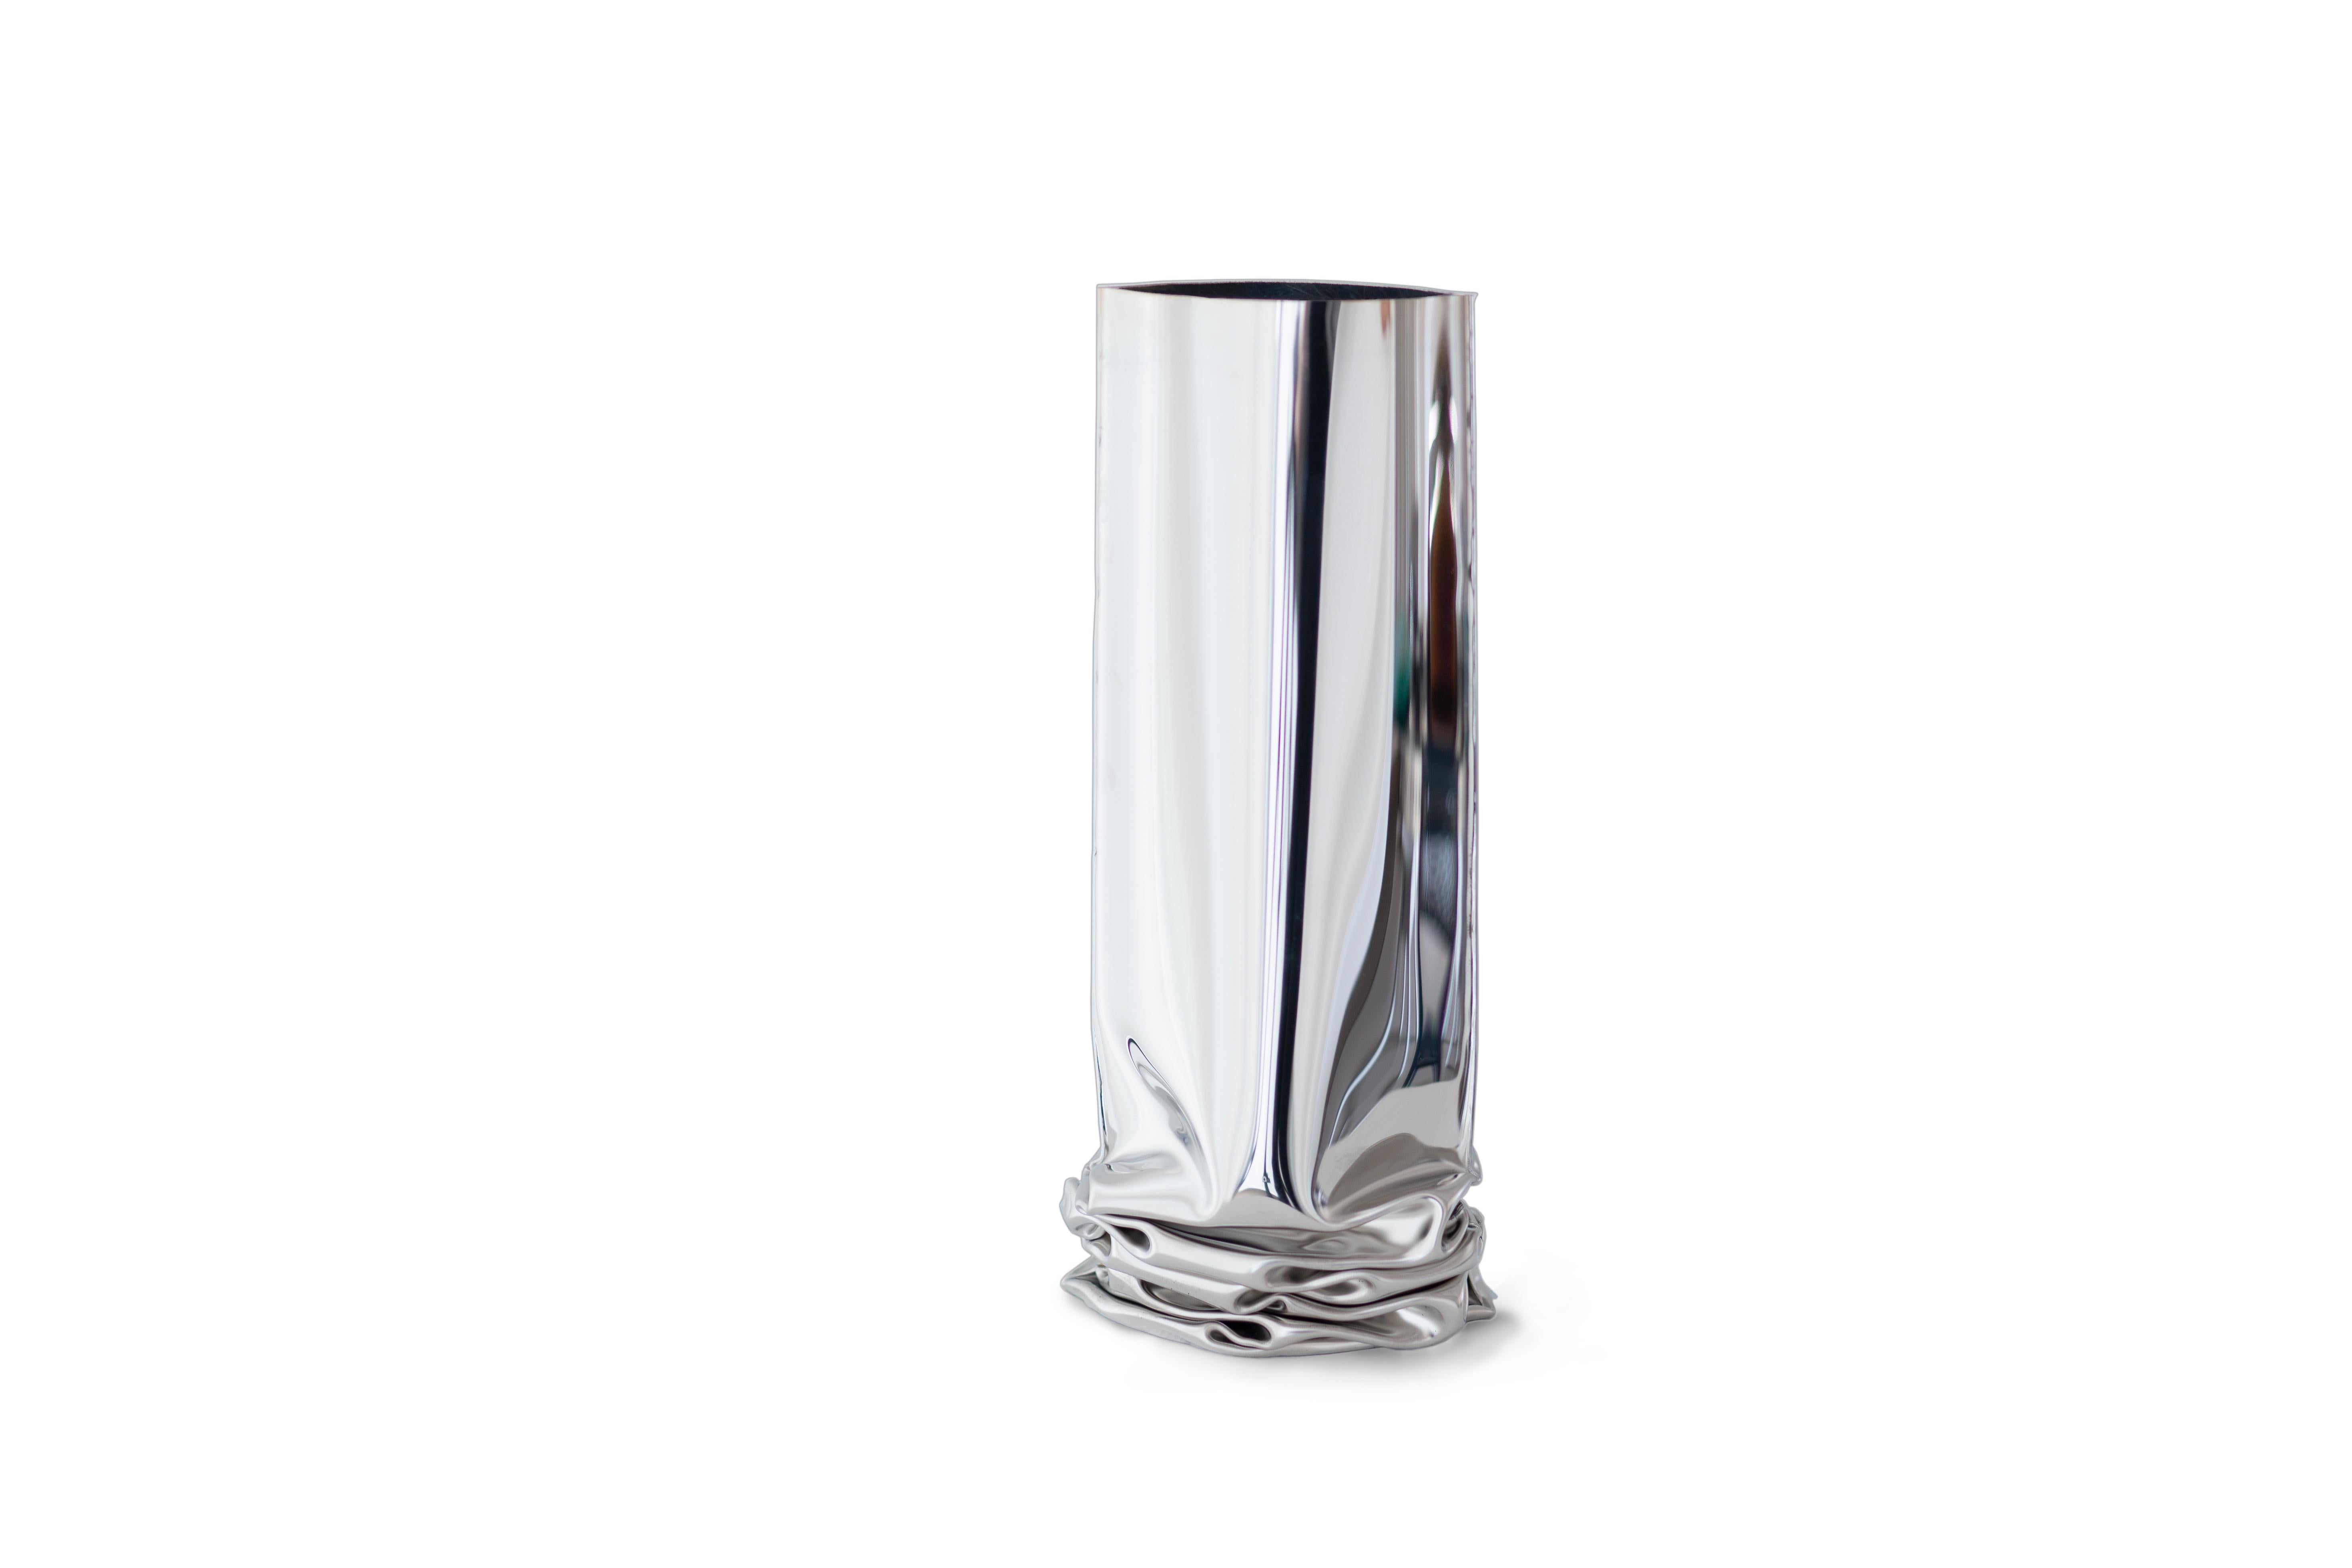 Polish Contemporary Vase, 'Crash Vase' by Zieta, Small, Stainless Steel For Sale